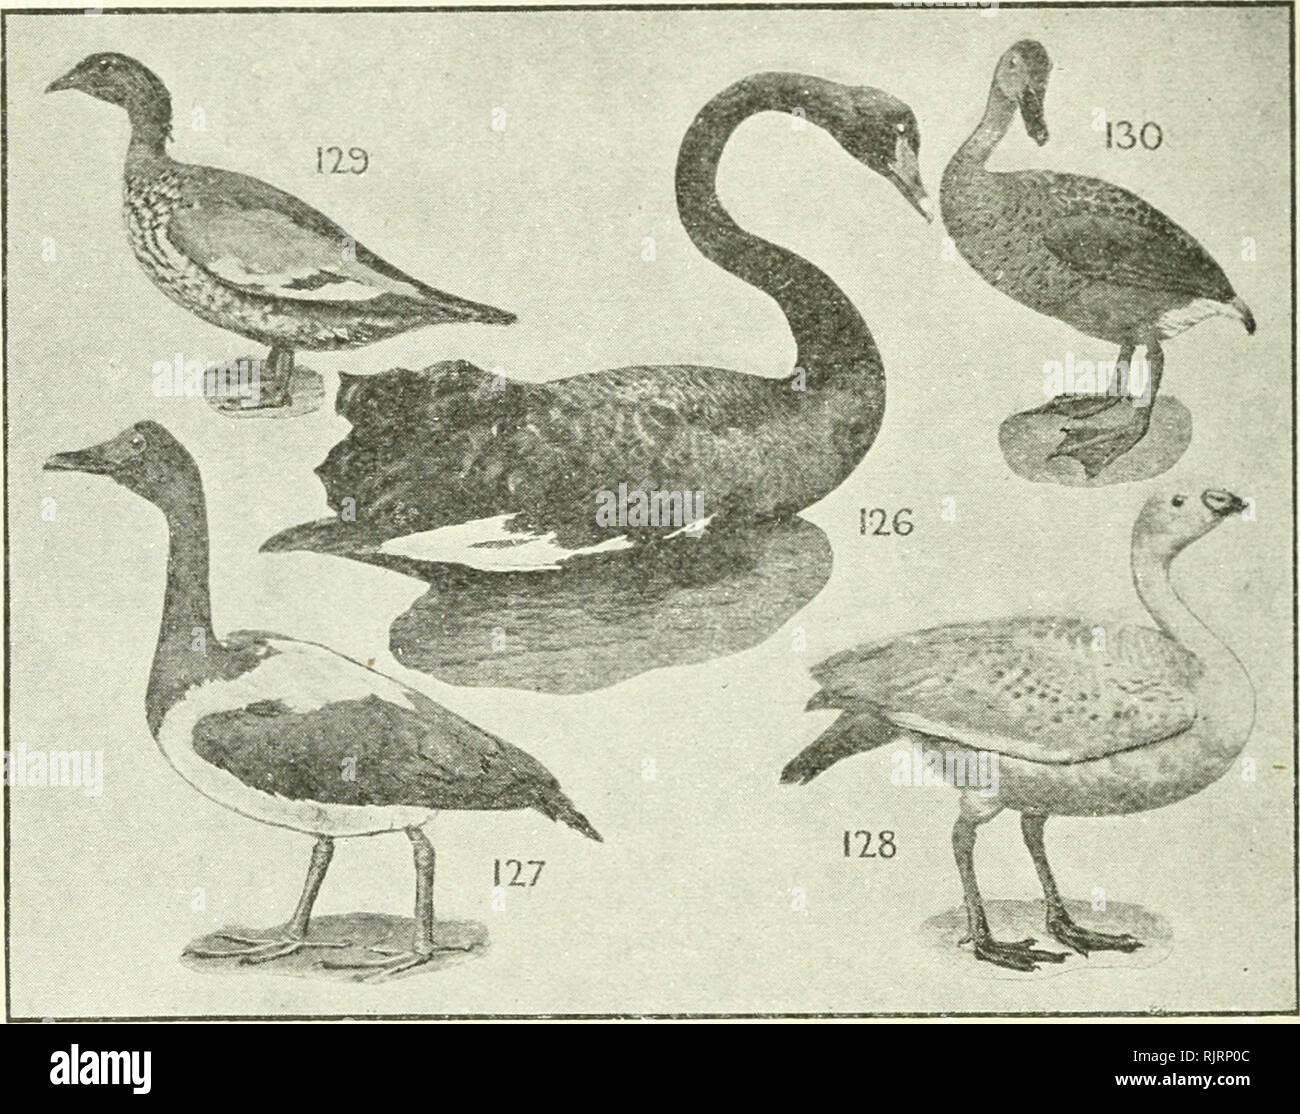 . An Australian bird book : a pocket book for field use. Birds -- Australia Identification. 62 AN AUSTRALIAN BIRD BOOK.. ORDER XIU.—ANSERIFORMES. F. 58. ANATIDAB (21), SWANS, GEESE, 206 sp.—39 (30) A., 50(9)0., 68(10)P., 41(21)E., 56(ll)Nc, 70(39)N1. 1 126 Black Swan, Chenopsis atrata, A., T. 1 Stat. c. lakes 40 Black; white on wing; very long neck; f., sim. Plants. Swans, Geese, and Ducks, the Swimming Birds grouped in Order XIII., are all classified in one family, though there are many sub-families. At the head of the Australian birds is the Black Swan—that rara avis which,&quot;possibly, ha Stock Photo